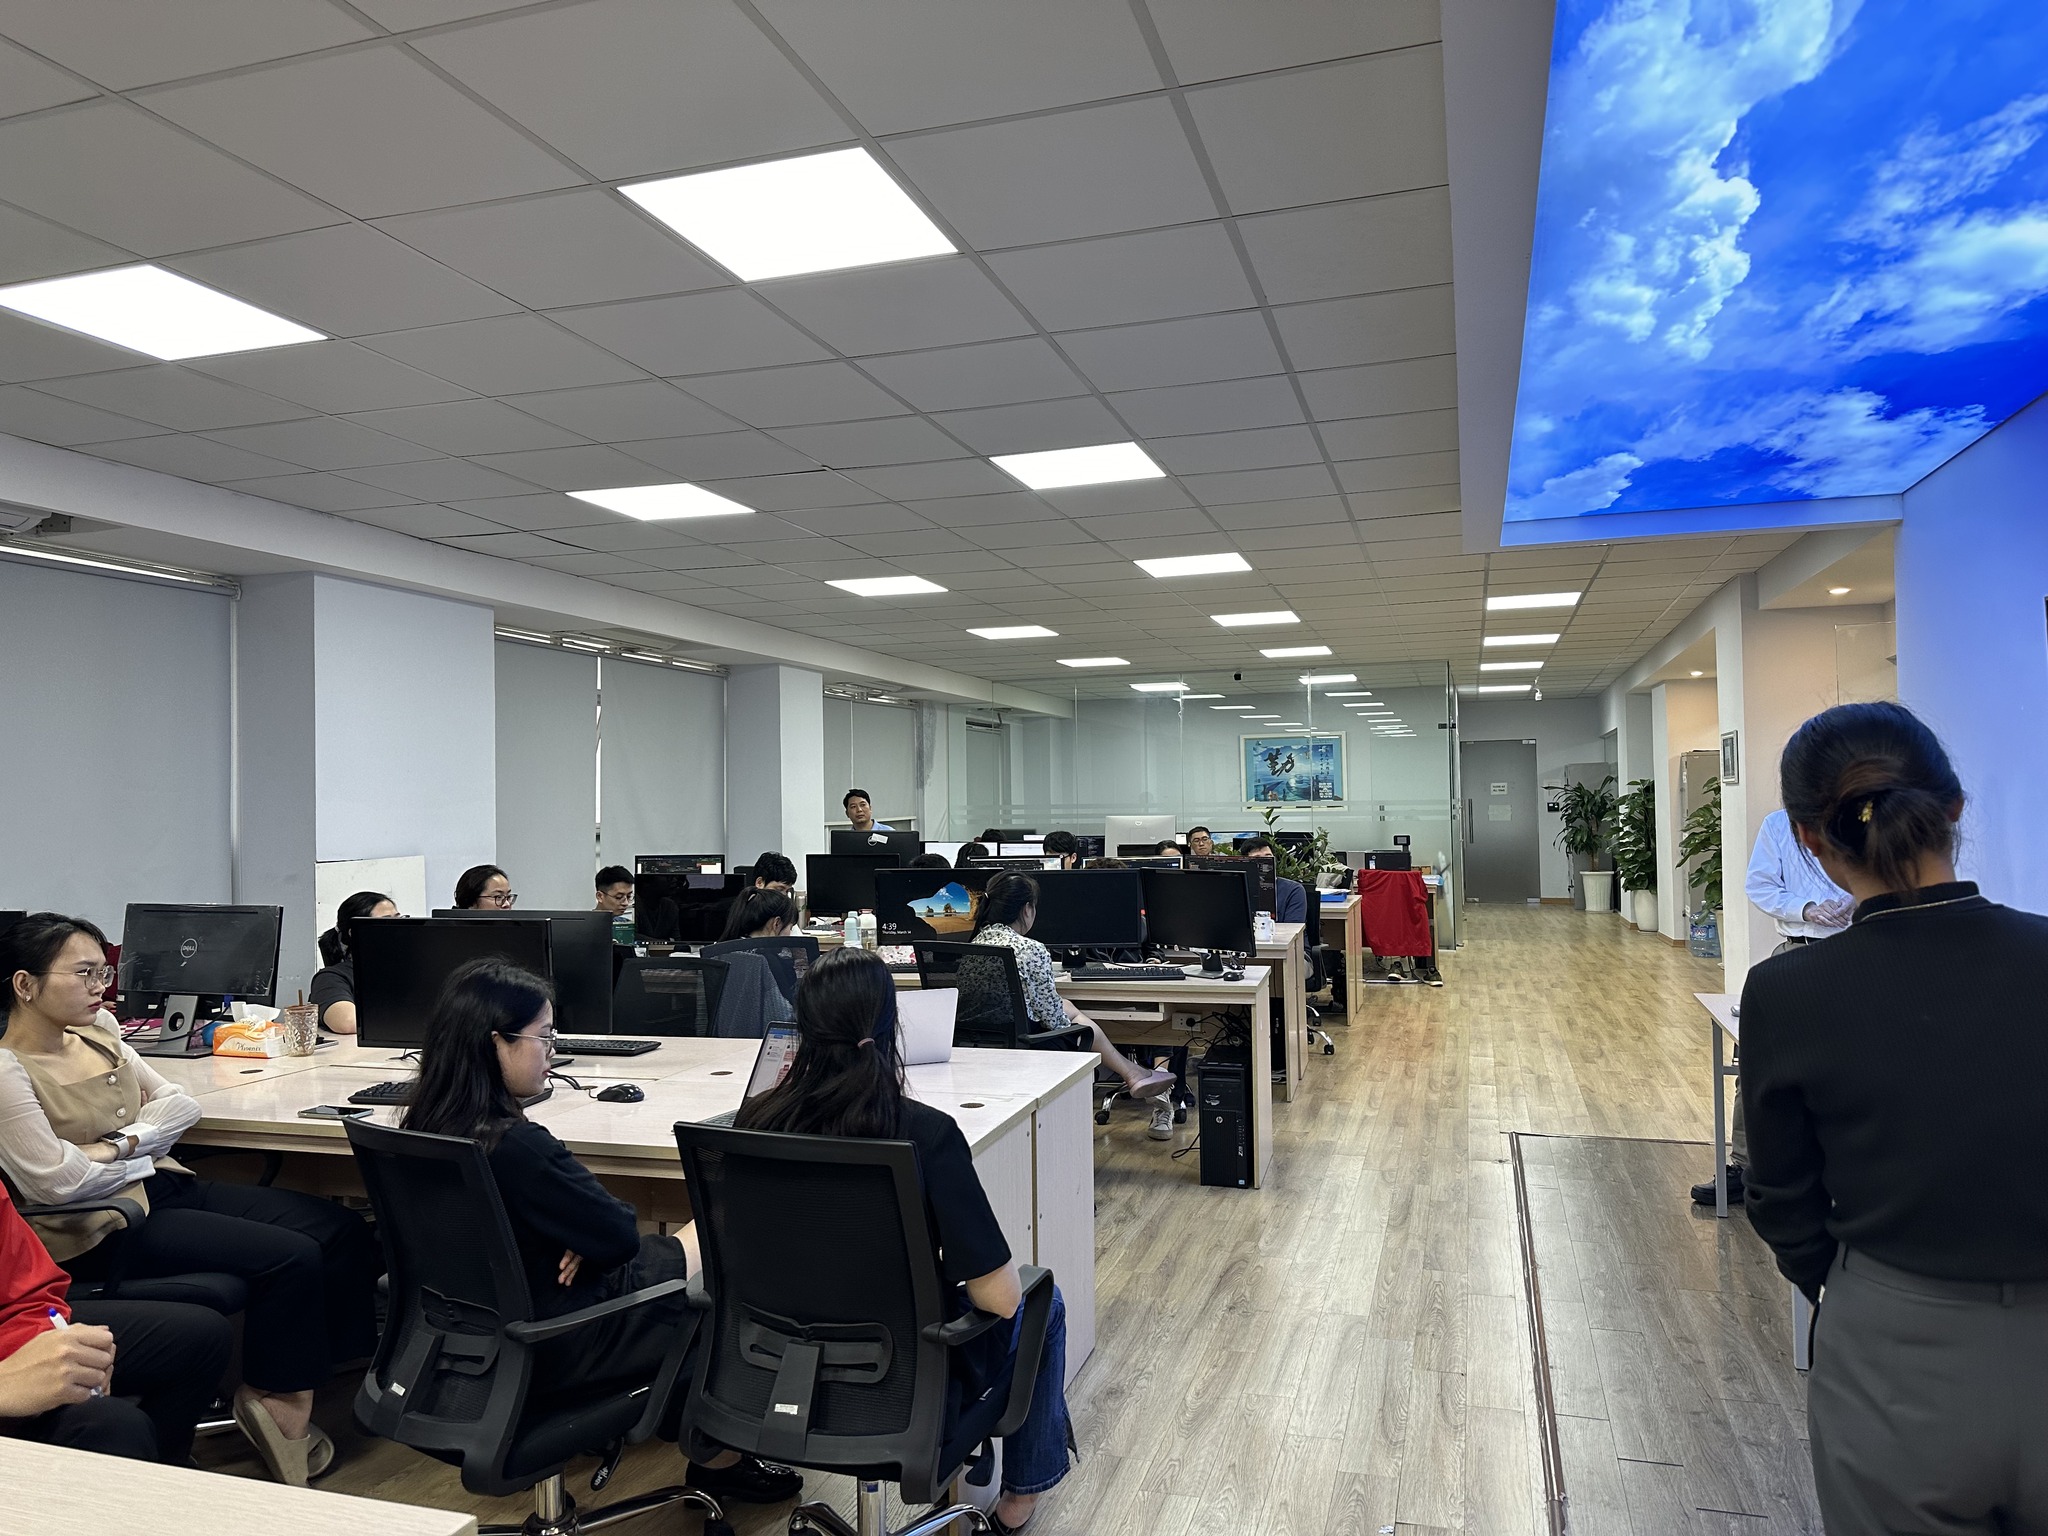 Tinhvan Software organizes a training session on the 5S regulations for employees